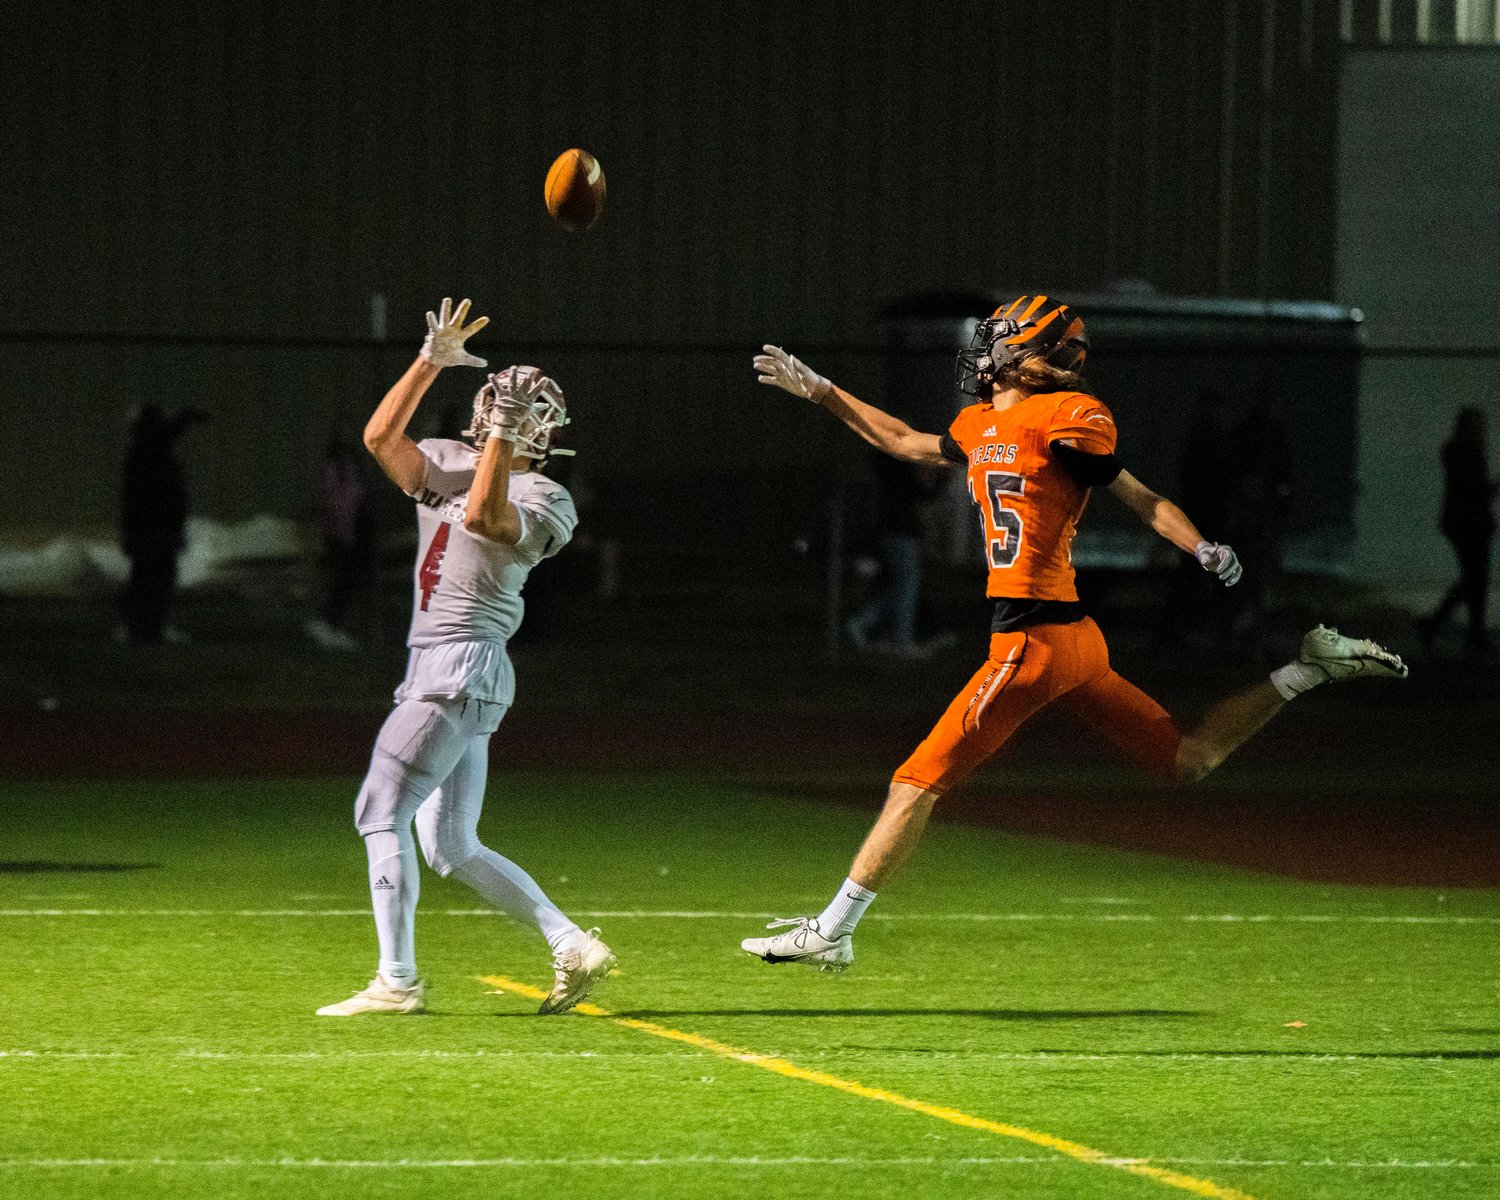 W.F. West sophomore Gage Brumfield (4) rmakes a catch for a touchdown during a Friday night game in Centralia.